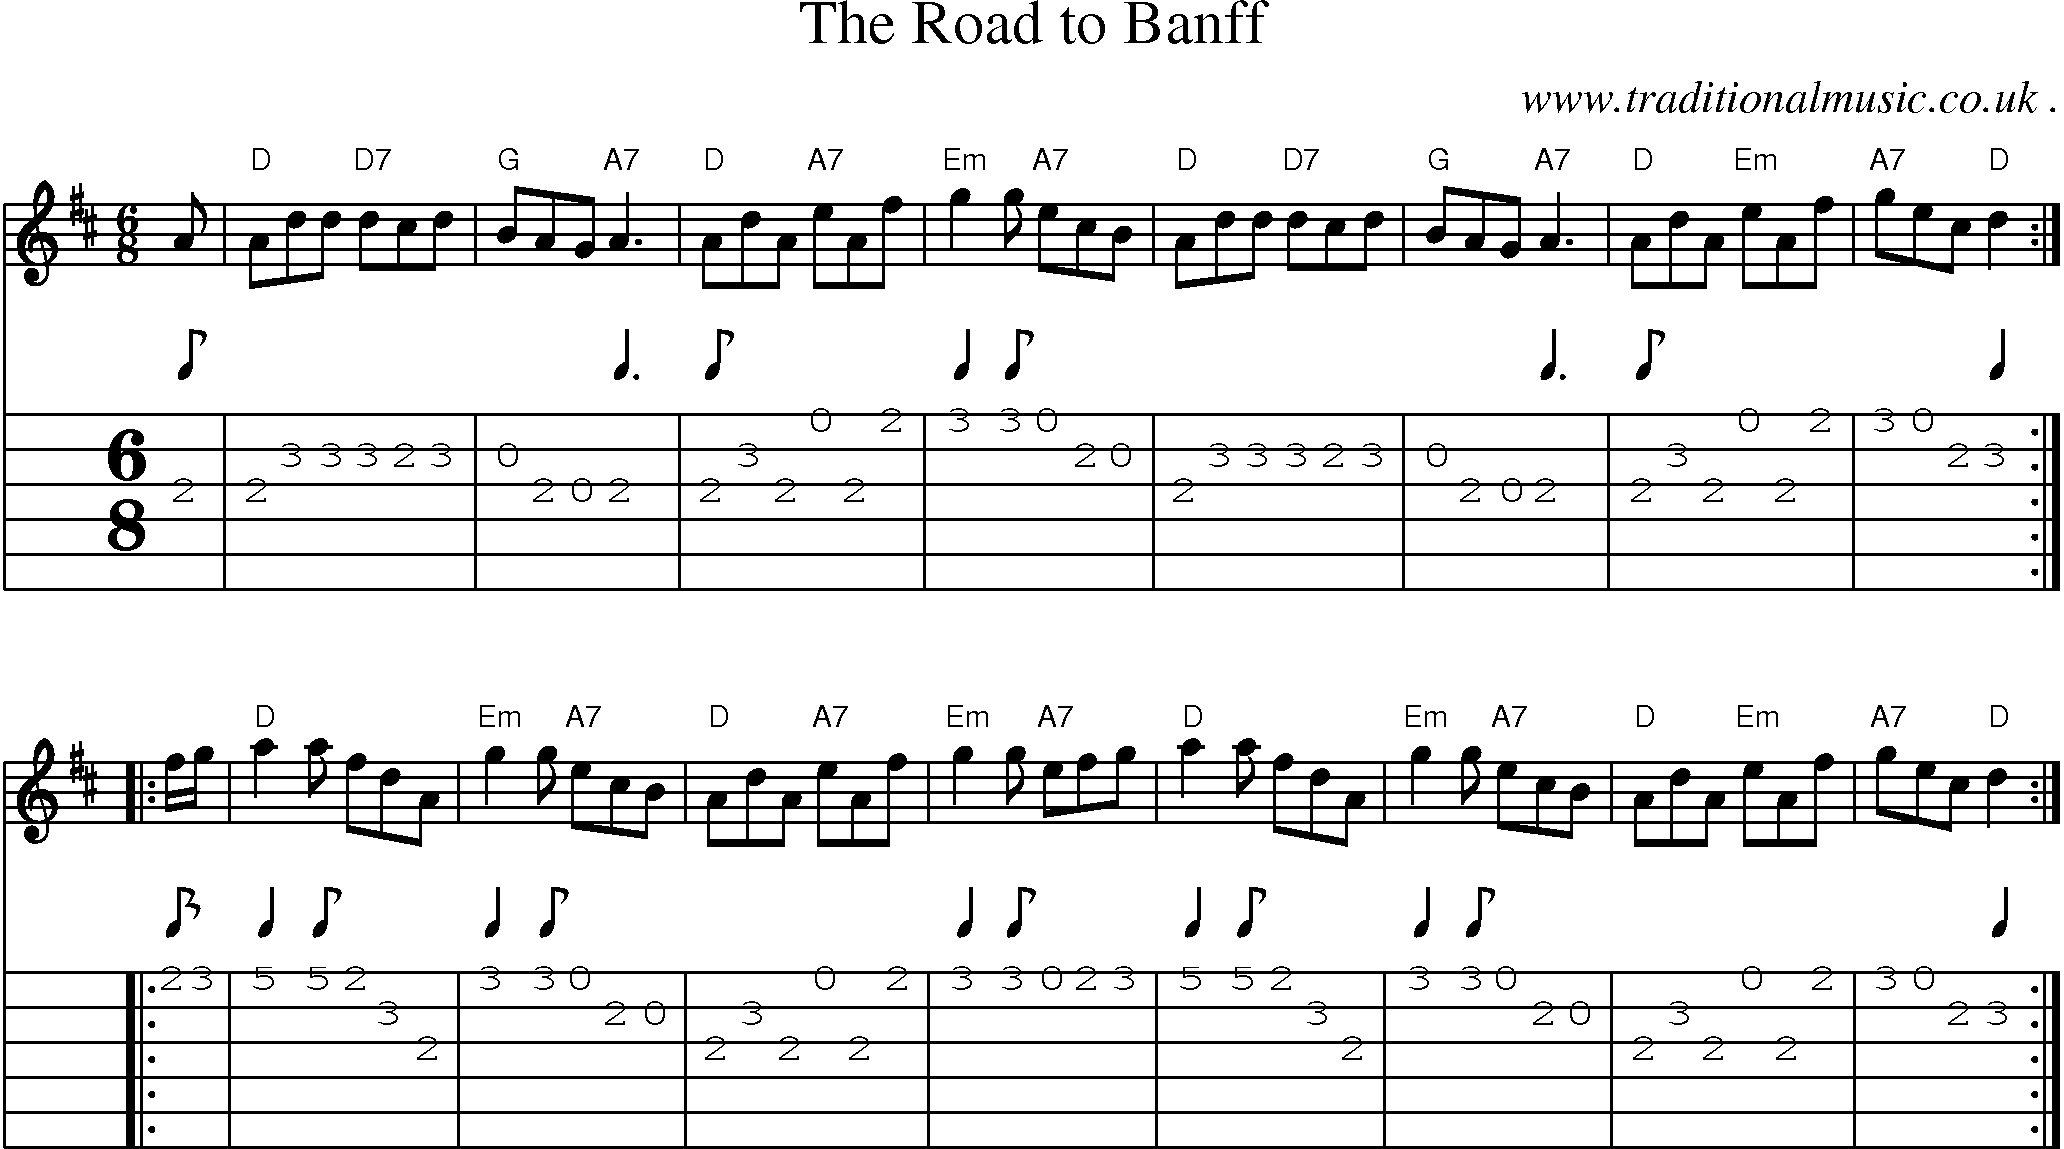 Sheet-music  score, Chords and Guitar Tabs for The Road To Banff